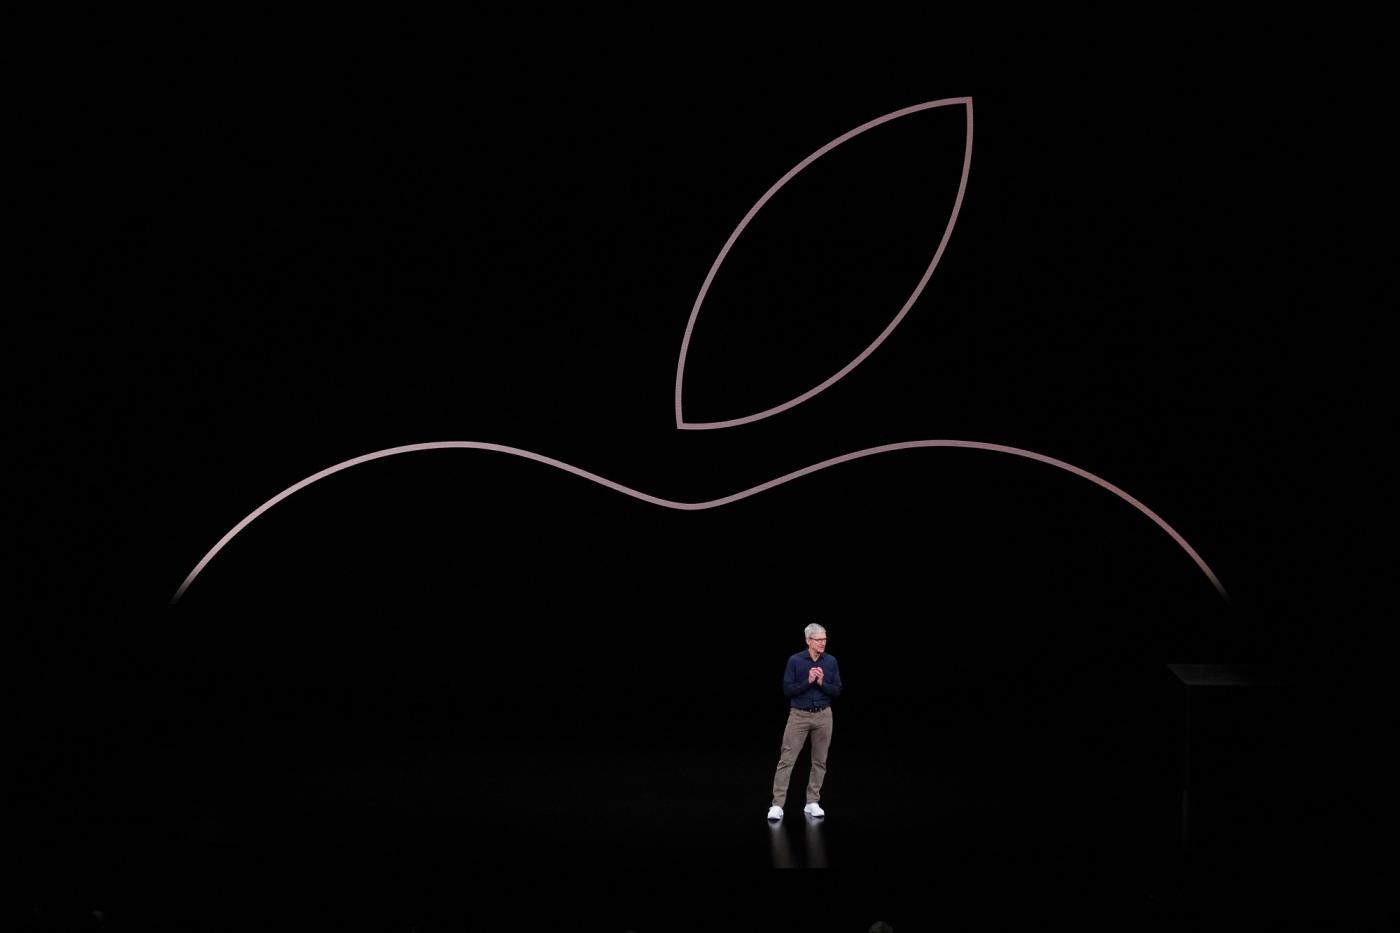 CUPERTINO, Sep. 13, 2018 (Xinhua) -- Tim Cook, CEO of Apple, speaks on stage at the Steve Jobs Theater during an event to announce new Apple products in Cupertino, the United States, on Sept. 12, 2018. (Xinhua/Wu Xiaoling/IANS) by .